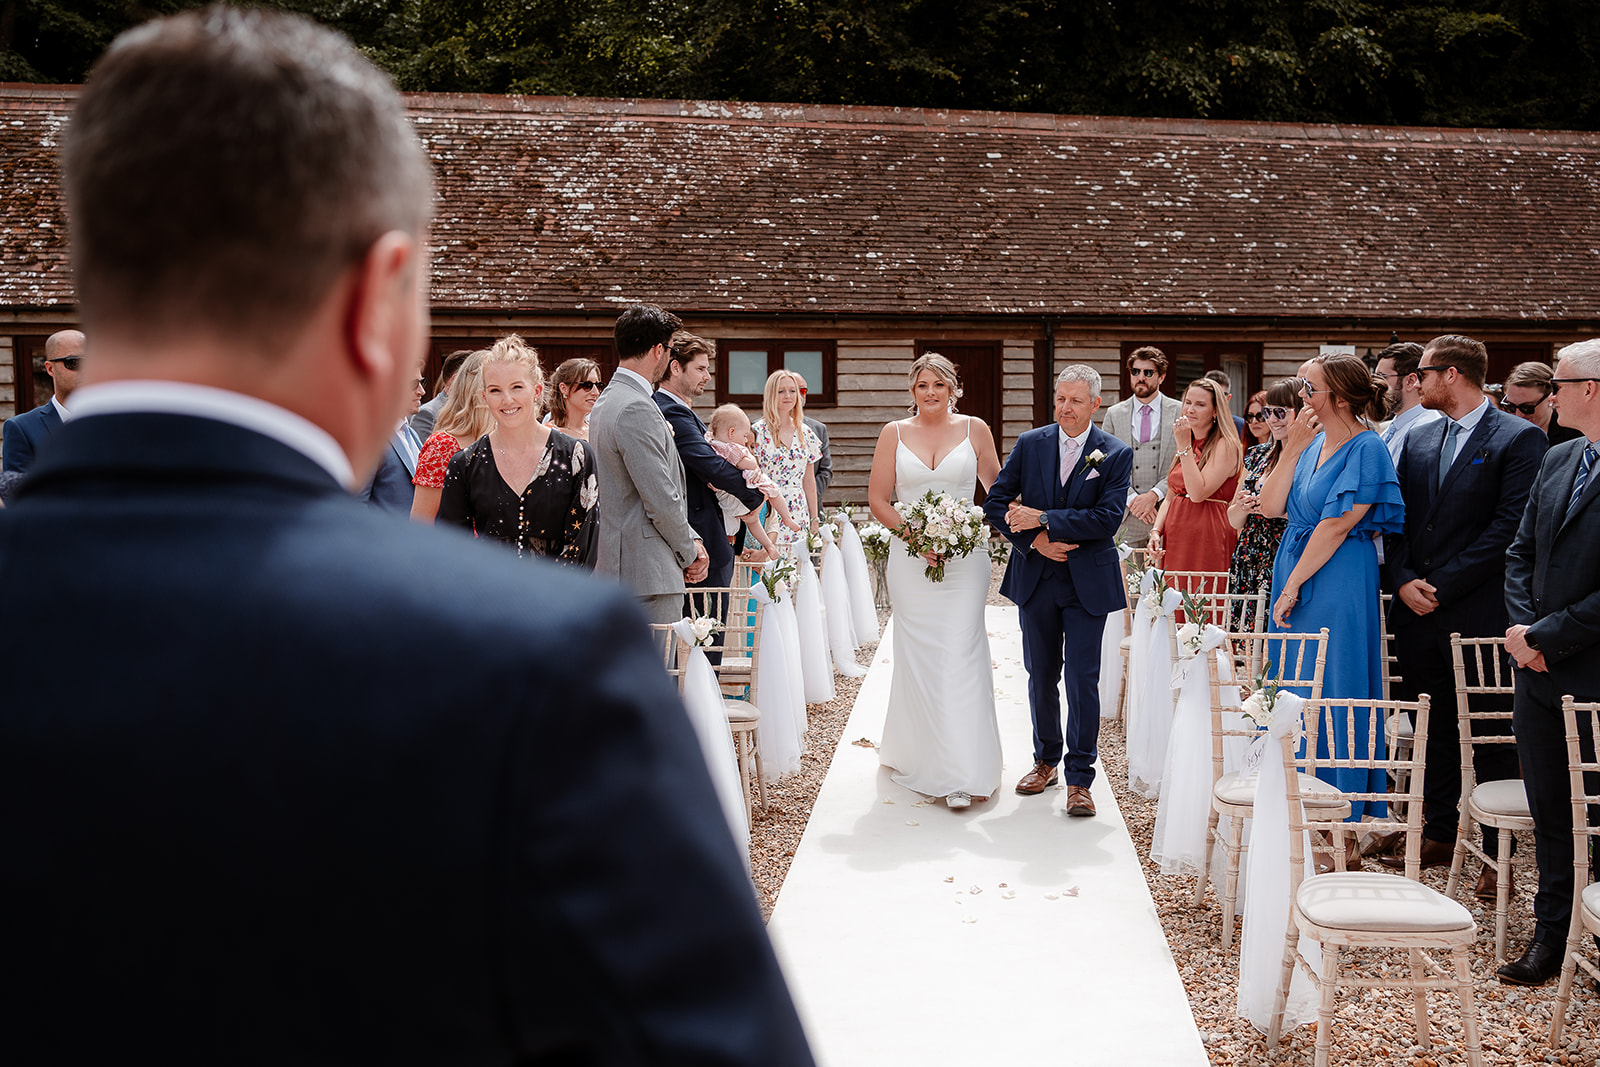 Outdoor ceremony at an elegant Kingston Country Courtyard Wedding